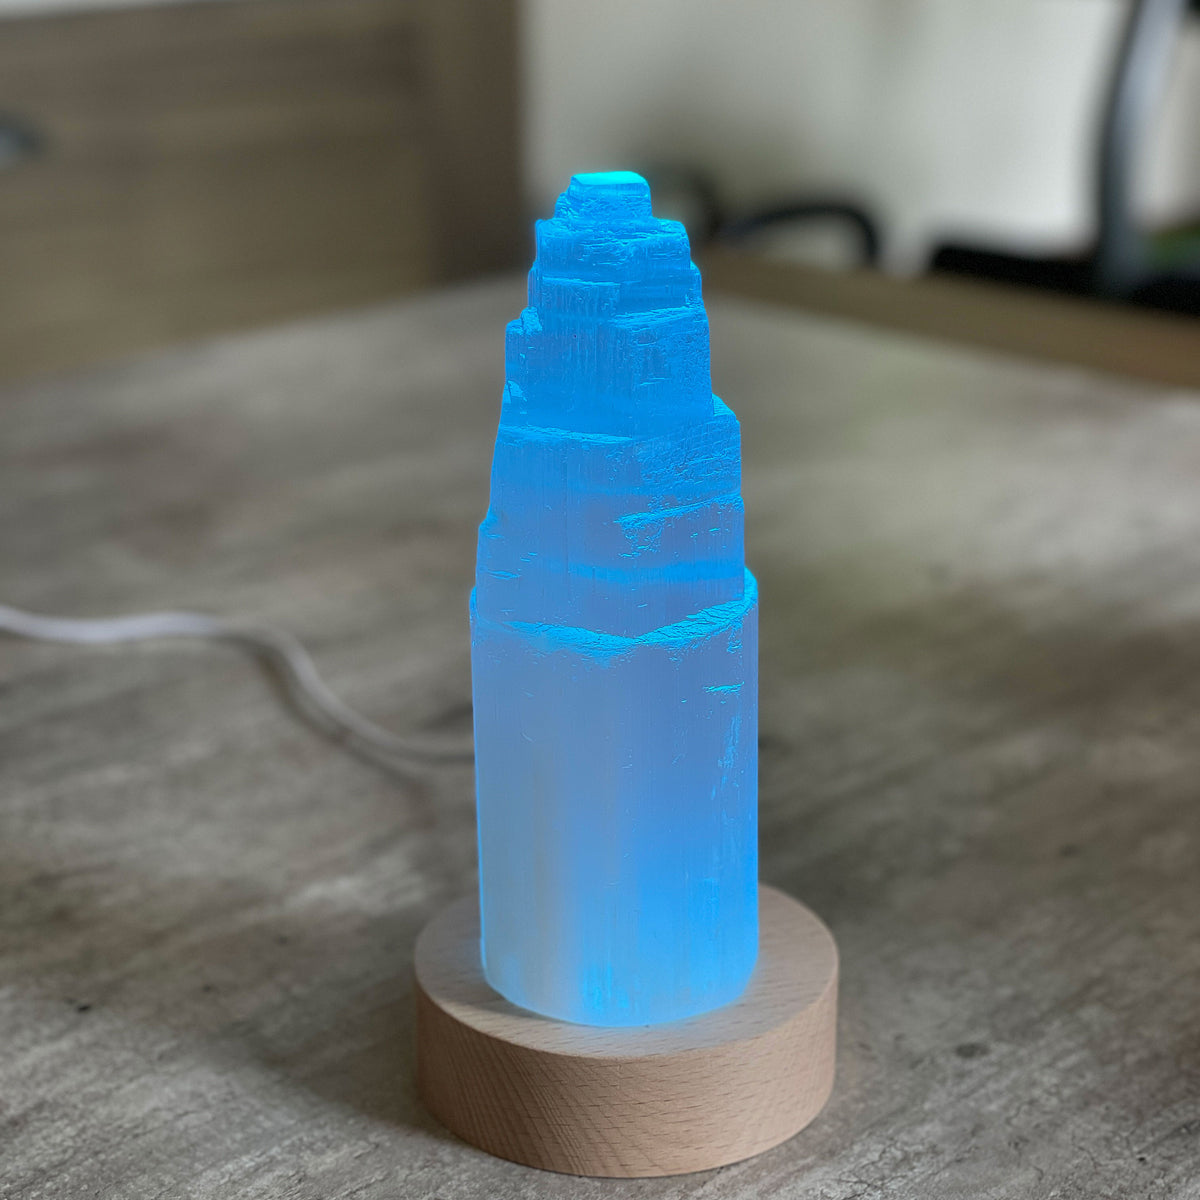 Selenite Lamp - Tower Small - Selenite is a beautiful and versatile crystal that offers numerous benefits, making it a popular choice for both decor and holistic purposes. Its natural beauty and unique translucent appearance make it an eye-catching addition to any home. Selenite emits a soft and warm glow, which makes it an excellent choice for a night light.